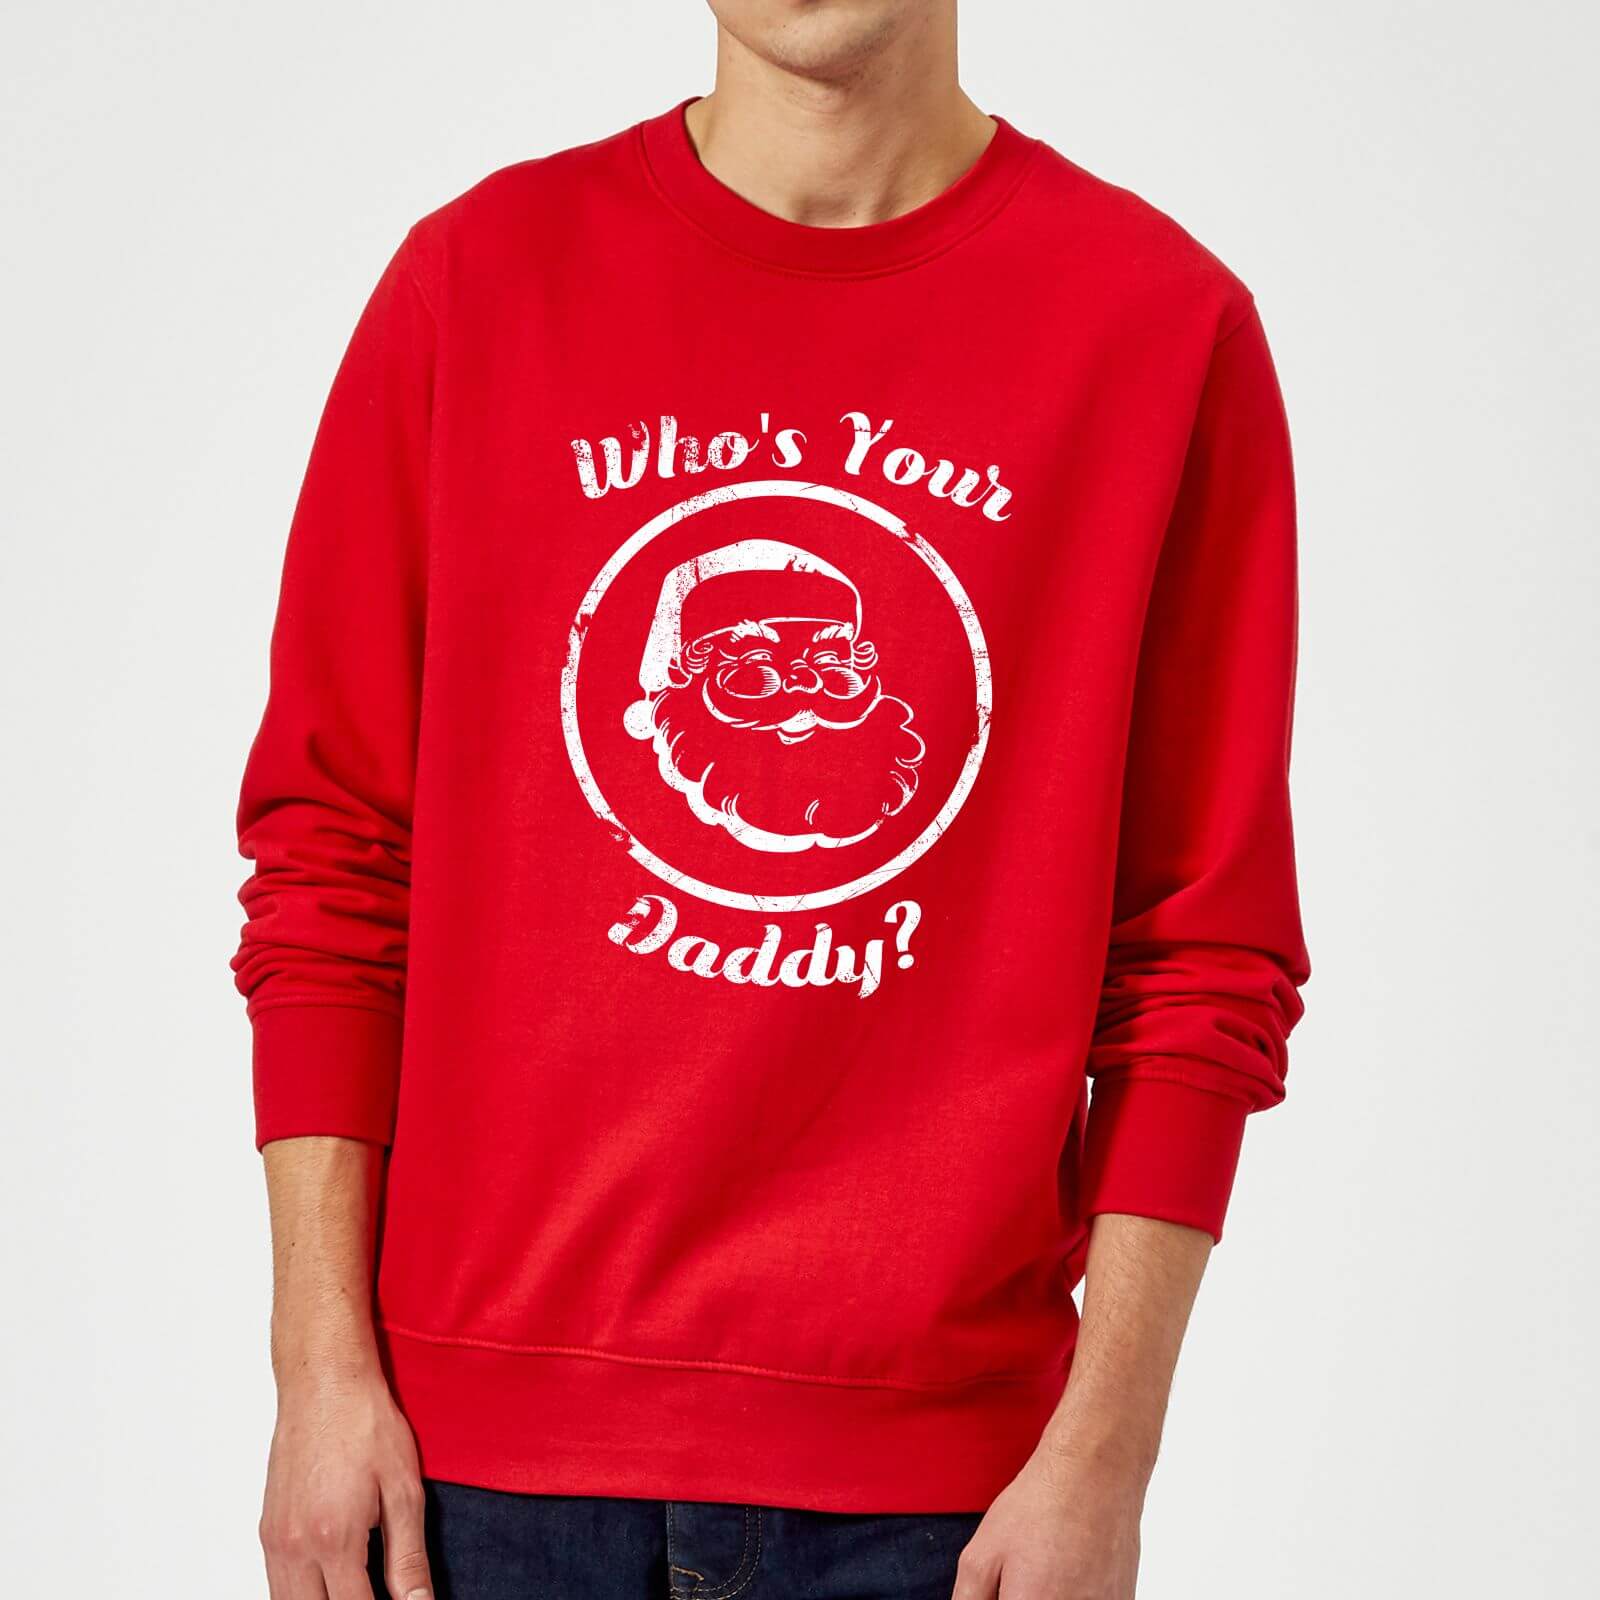 Who's Your Daddy? Christmas Sweatshirt - Red - M - Red